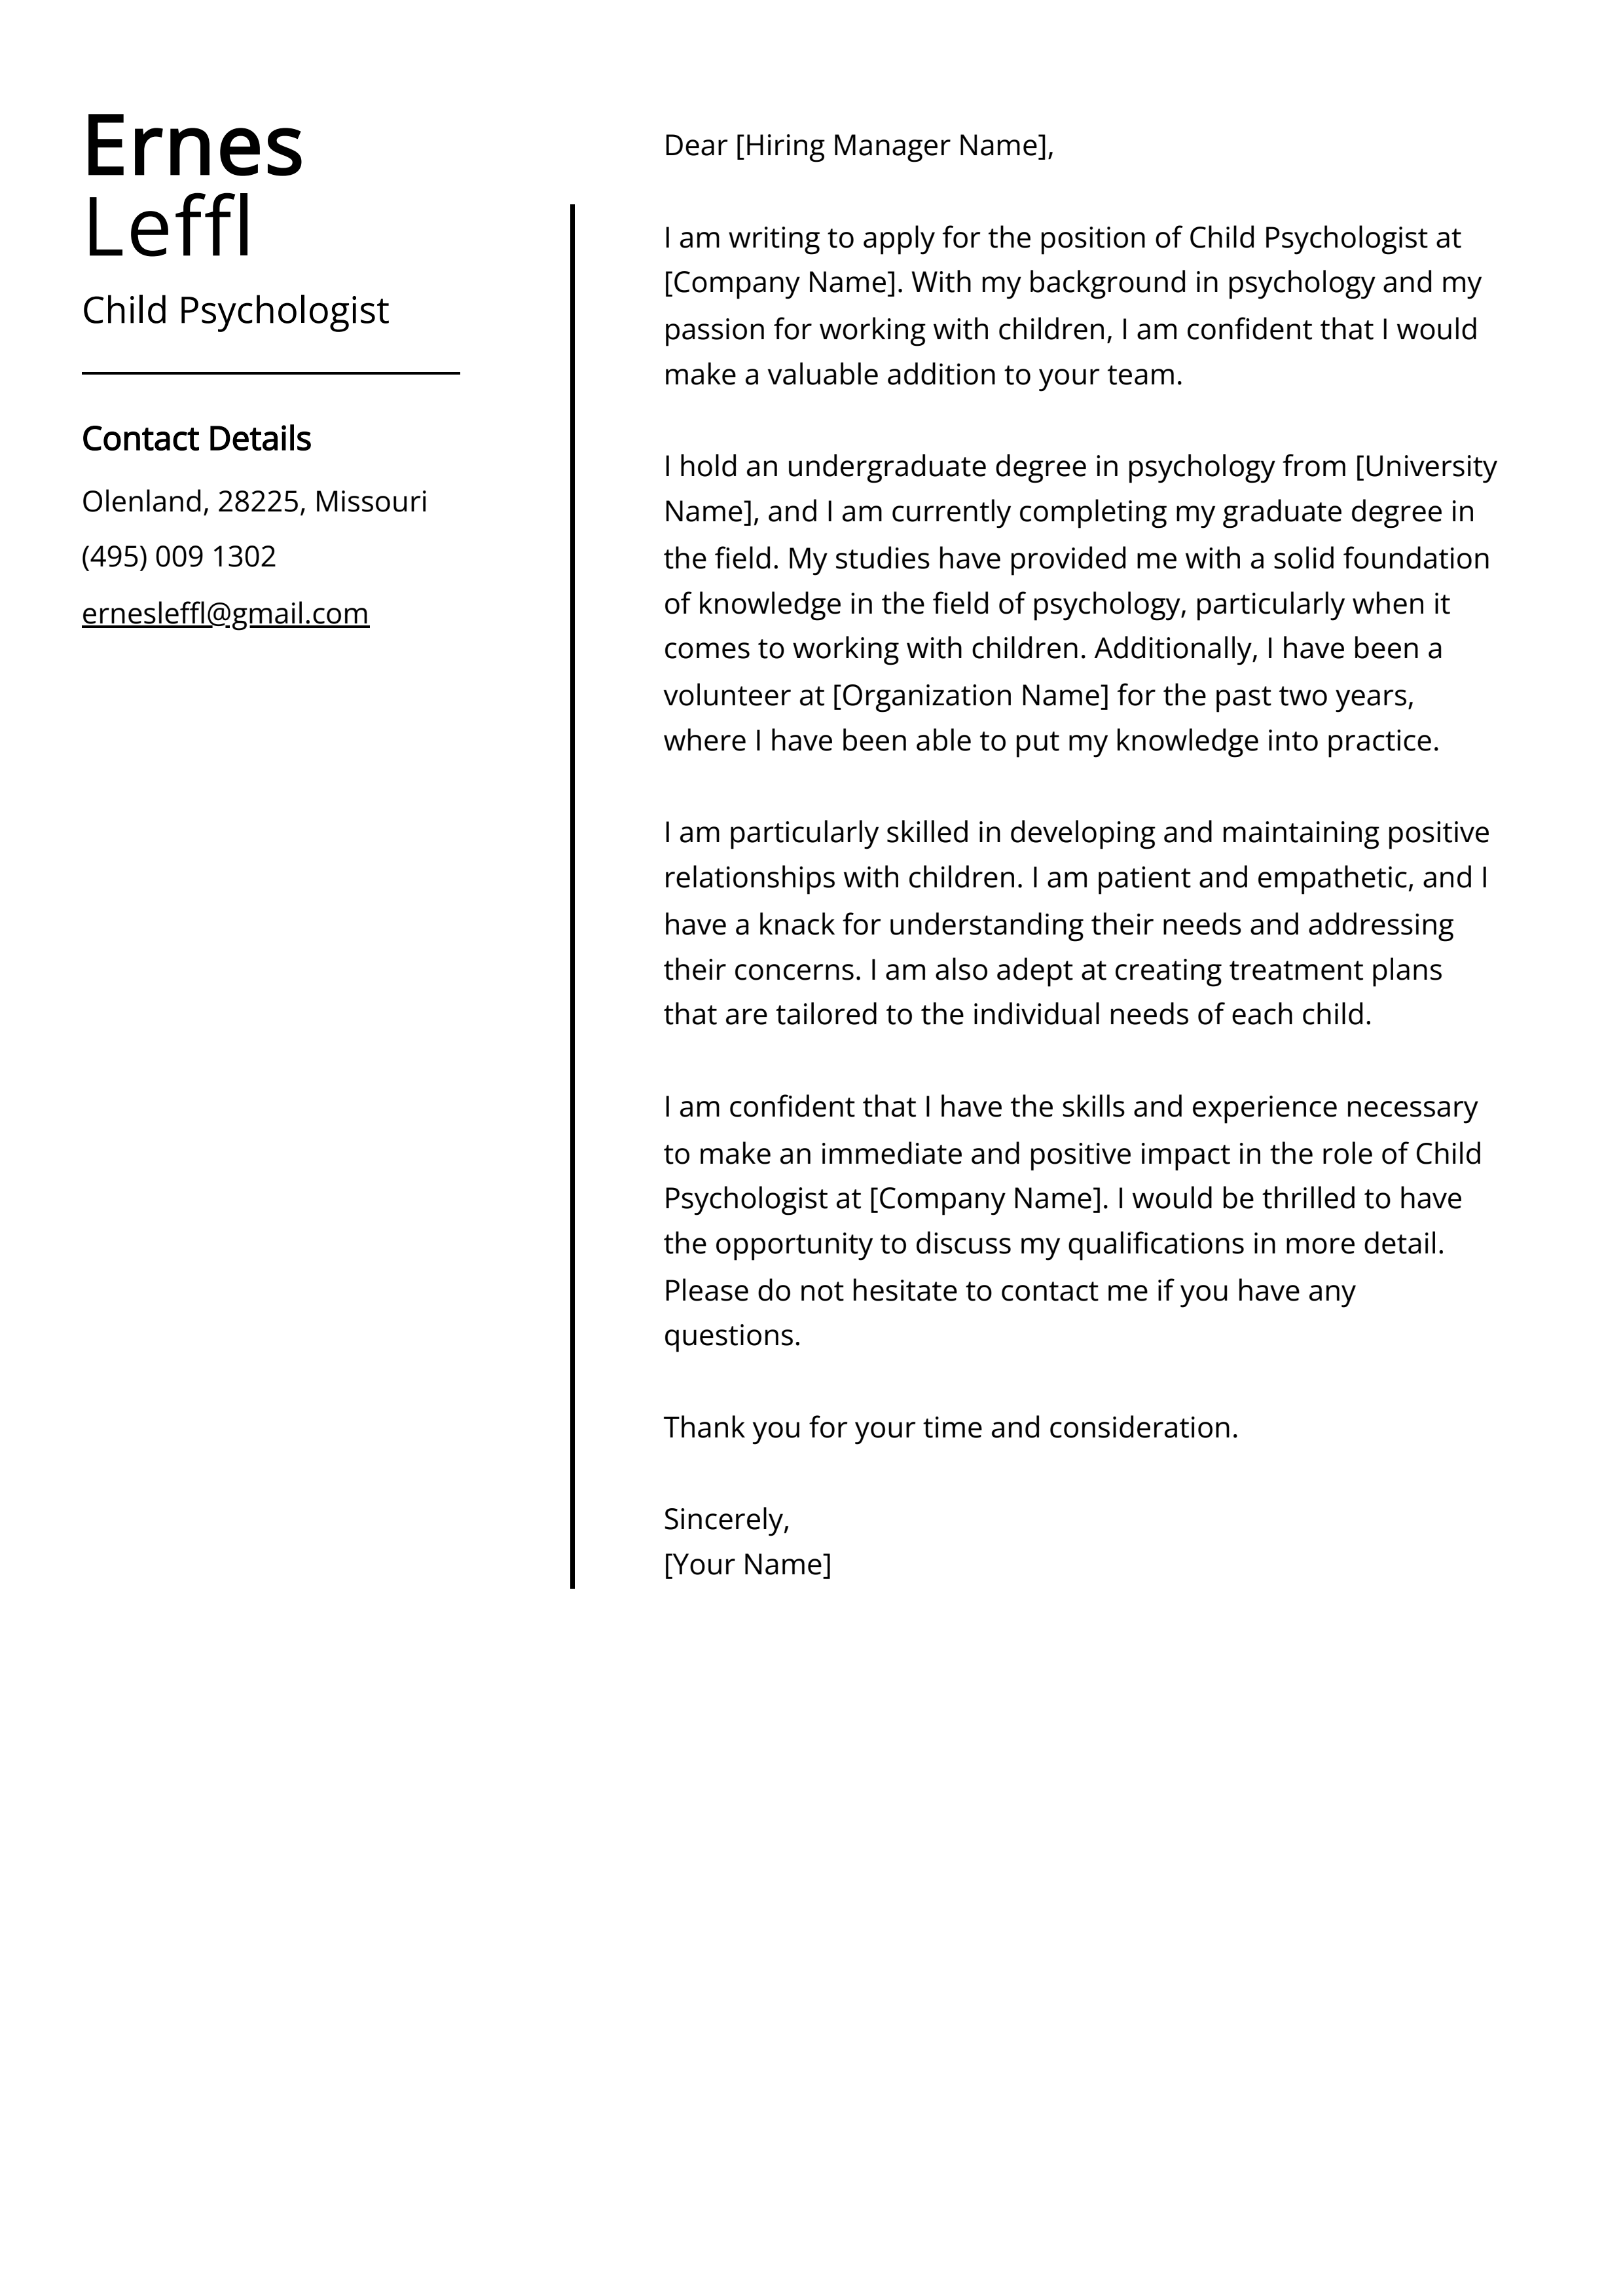 Child Psychologist Cover Letter Example